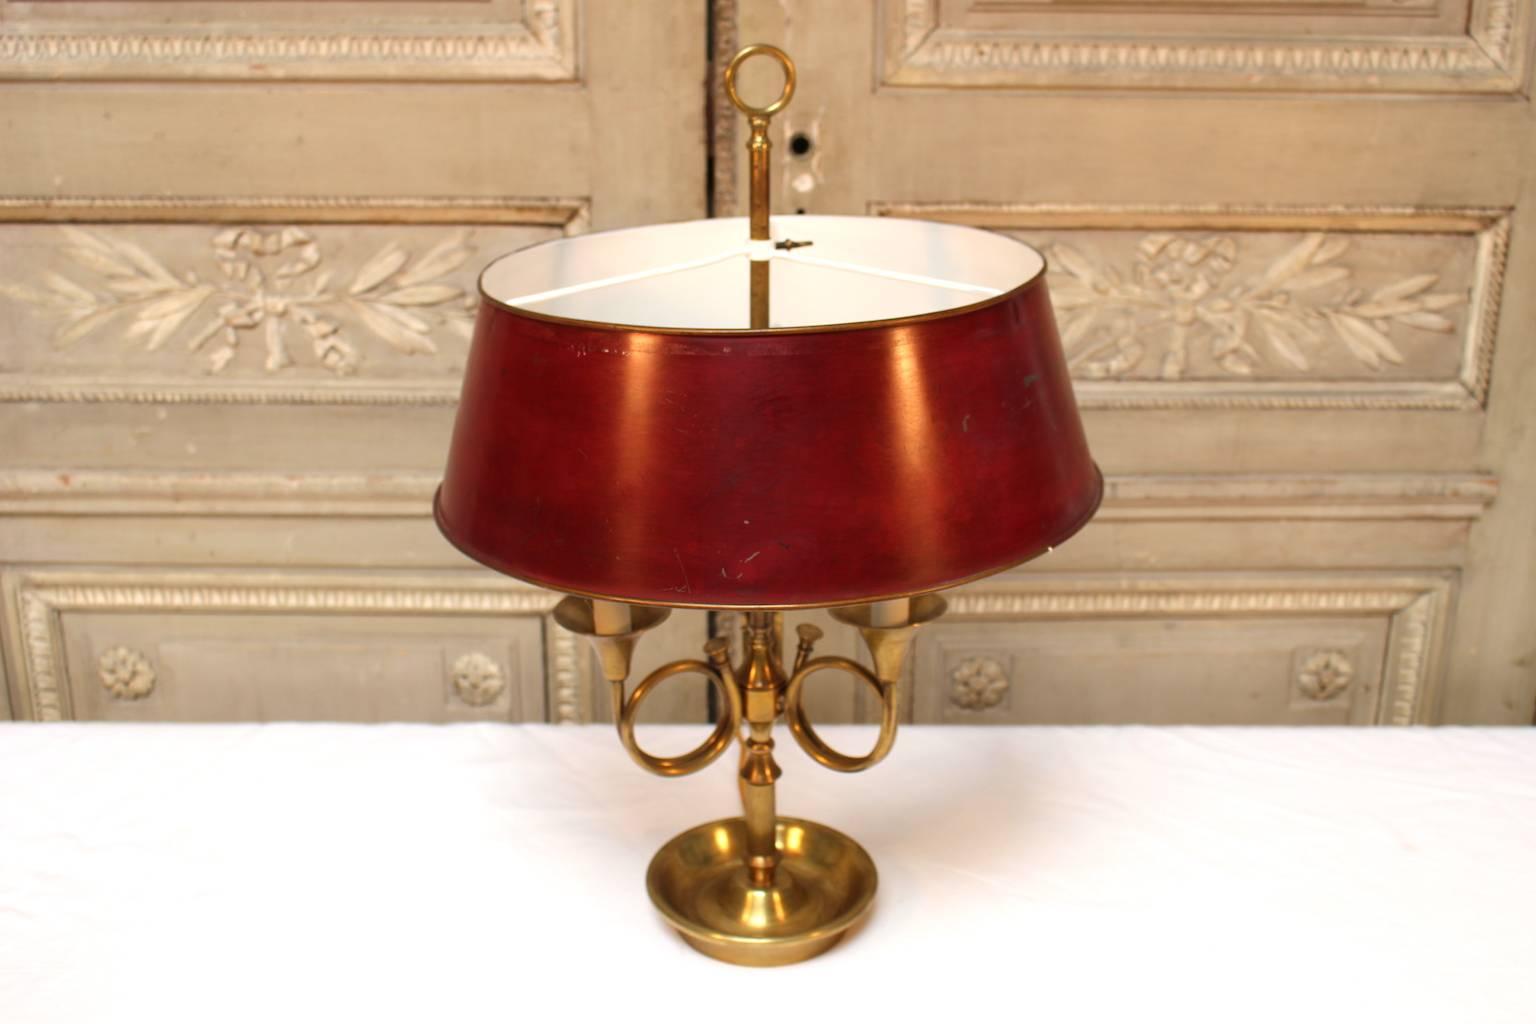 20th Century French Bronze and Tole Louis XVI Style Bouilliotte Lamp